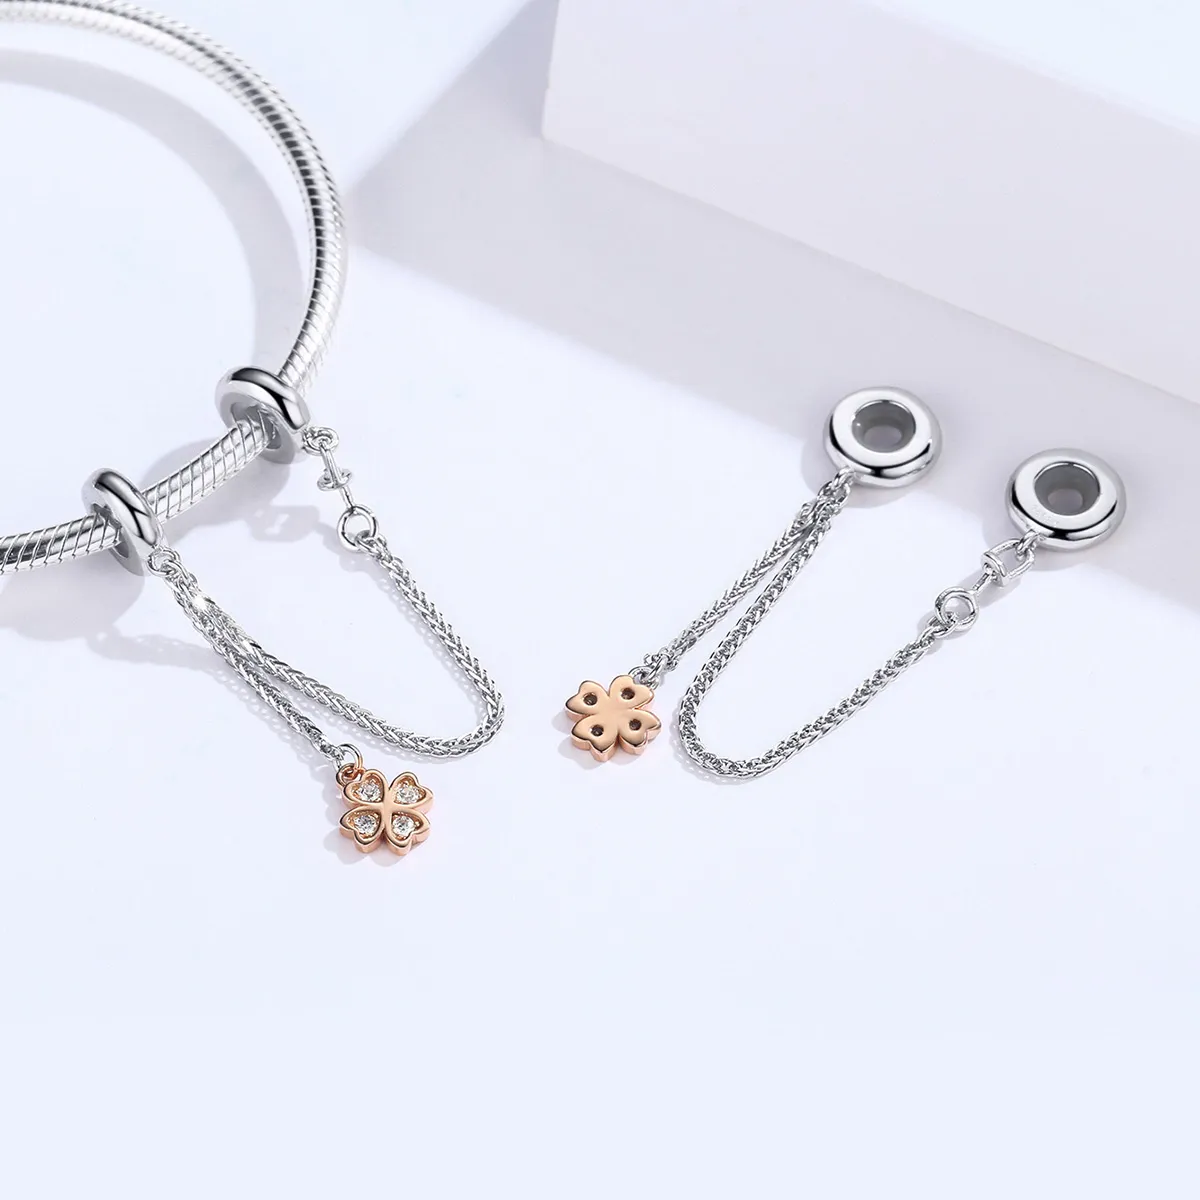 Pandora Style Silver & Rose Gold Clover Safety Chain - SCC1261